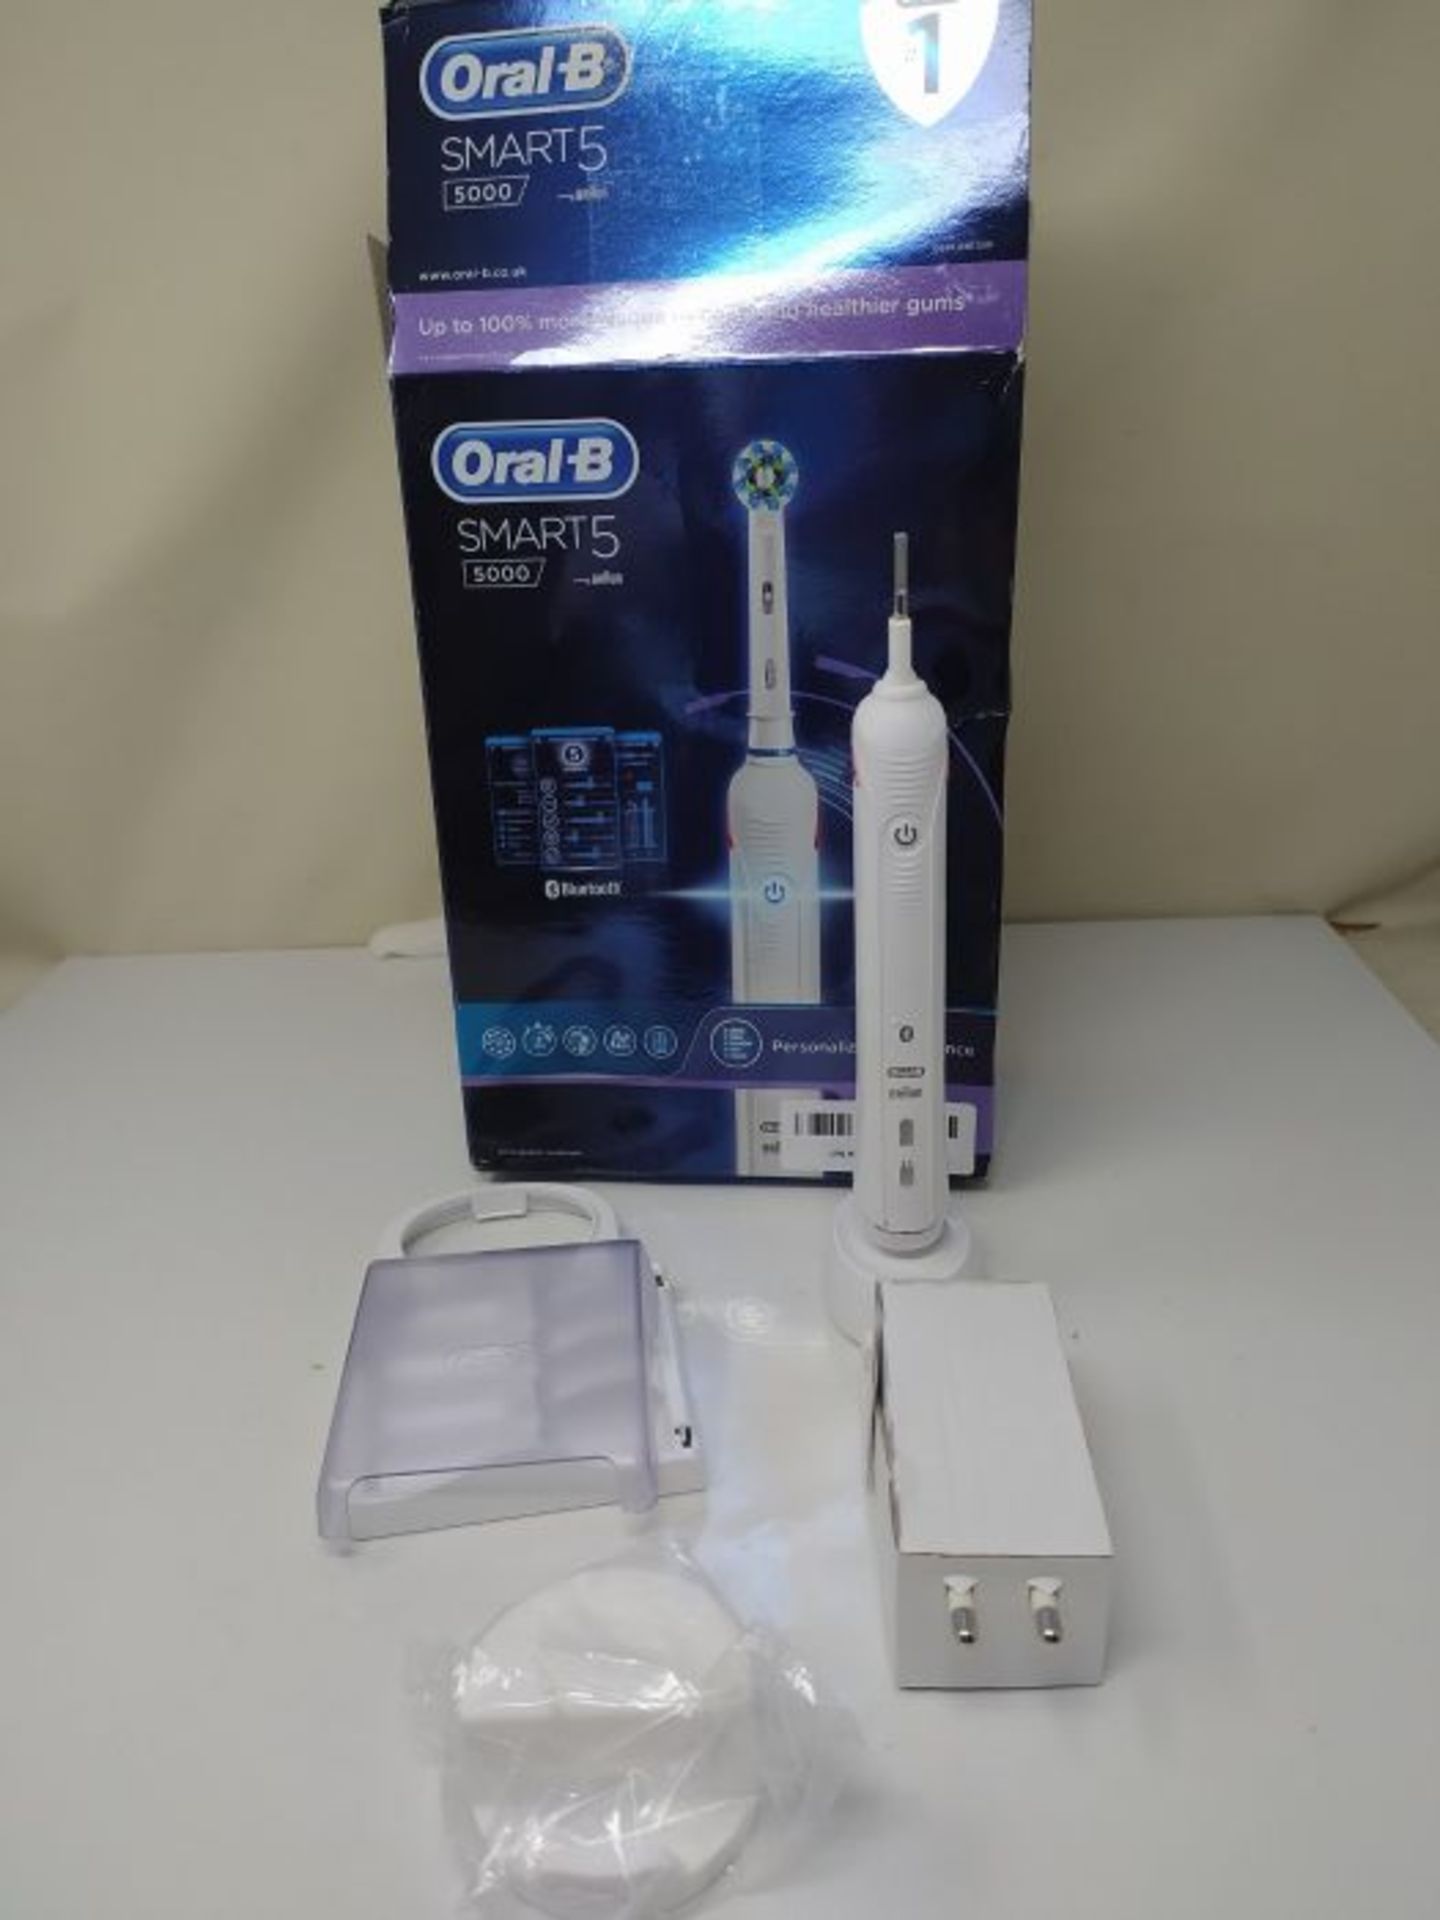 RRP £85.00 Oral-B Smart 5 Electric Toothbrush, 1 App Connected Handle, 5 Modes with Whitening, Se - Image 2 of 2